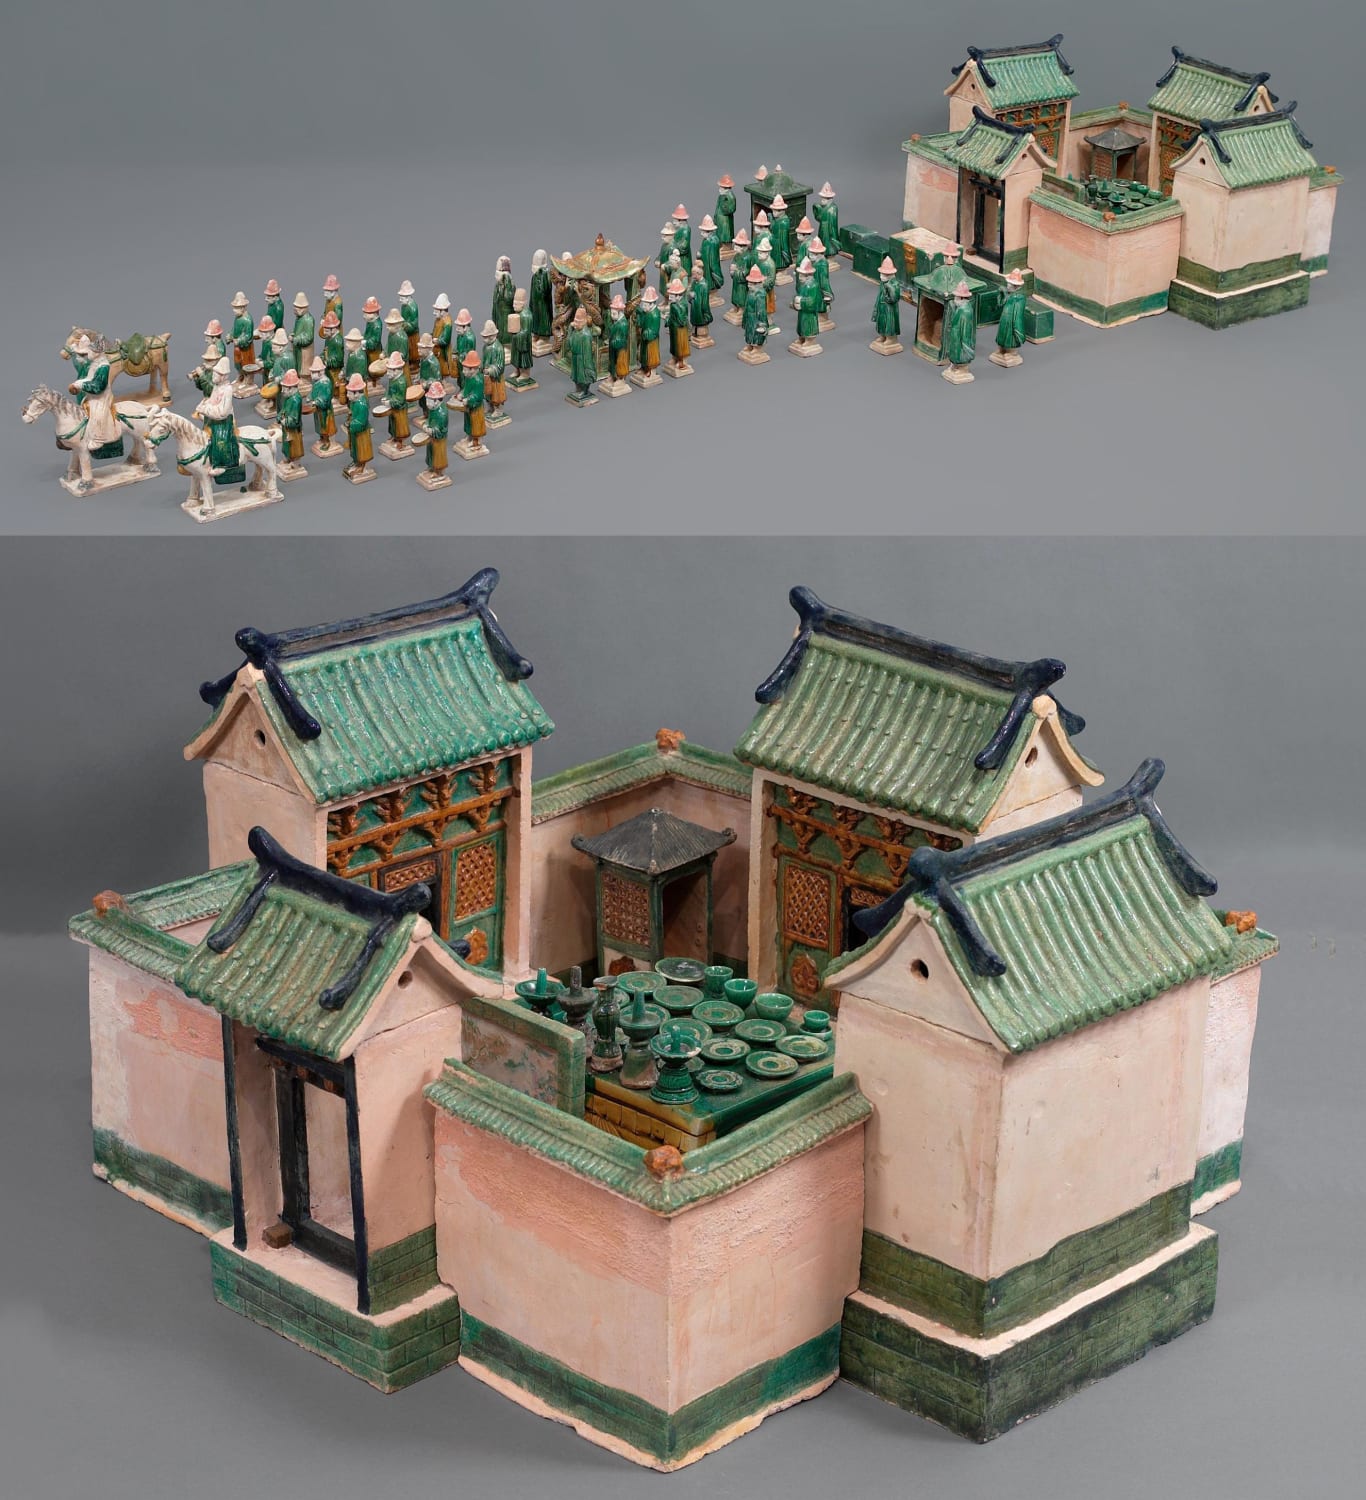 Ceramic model of a wedding procession, and courtyard building with feast table. China, Ming dynasty, 1368-1644